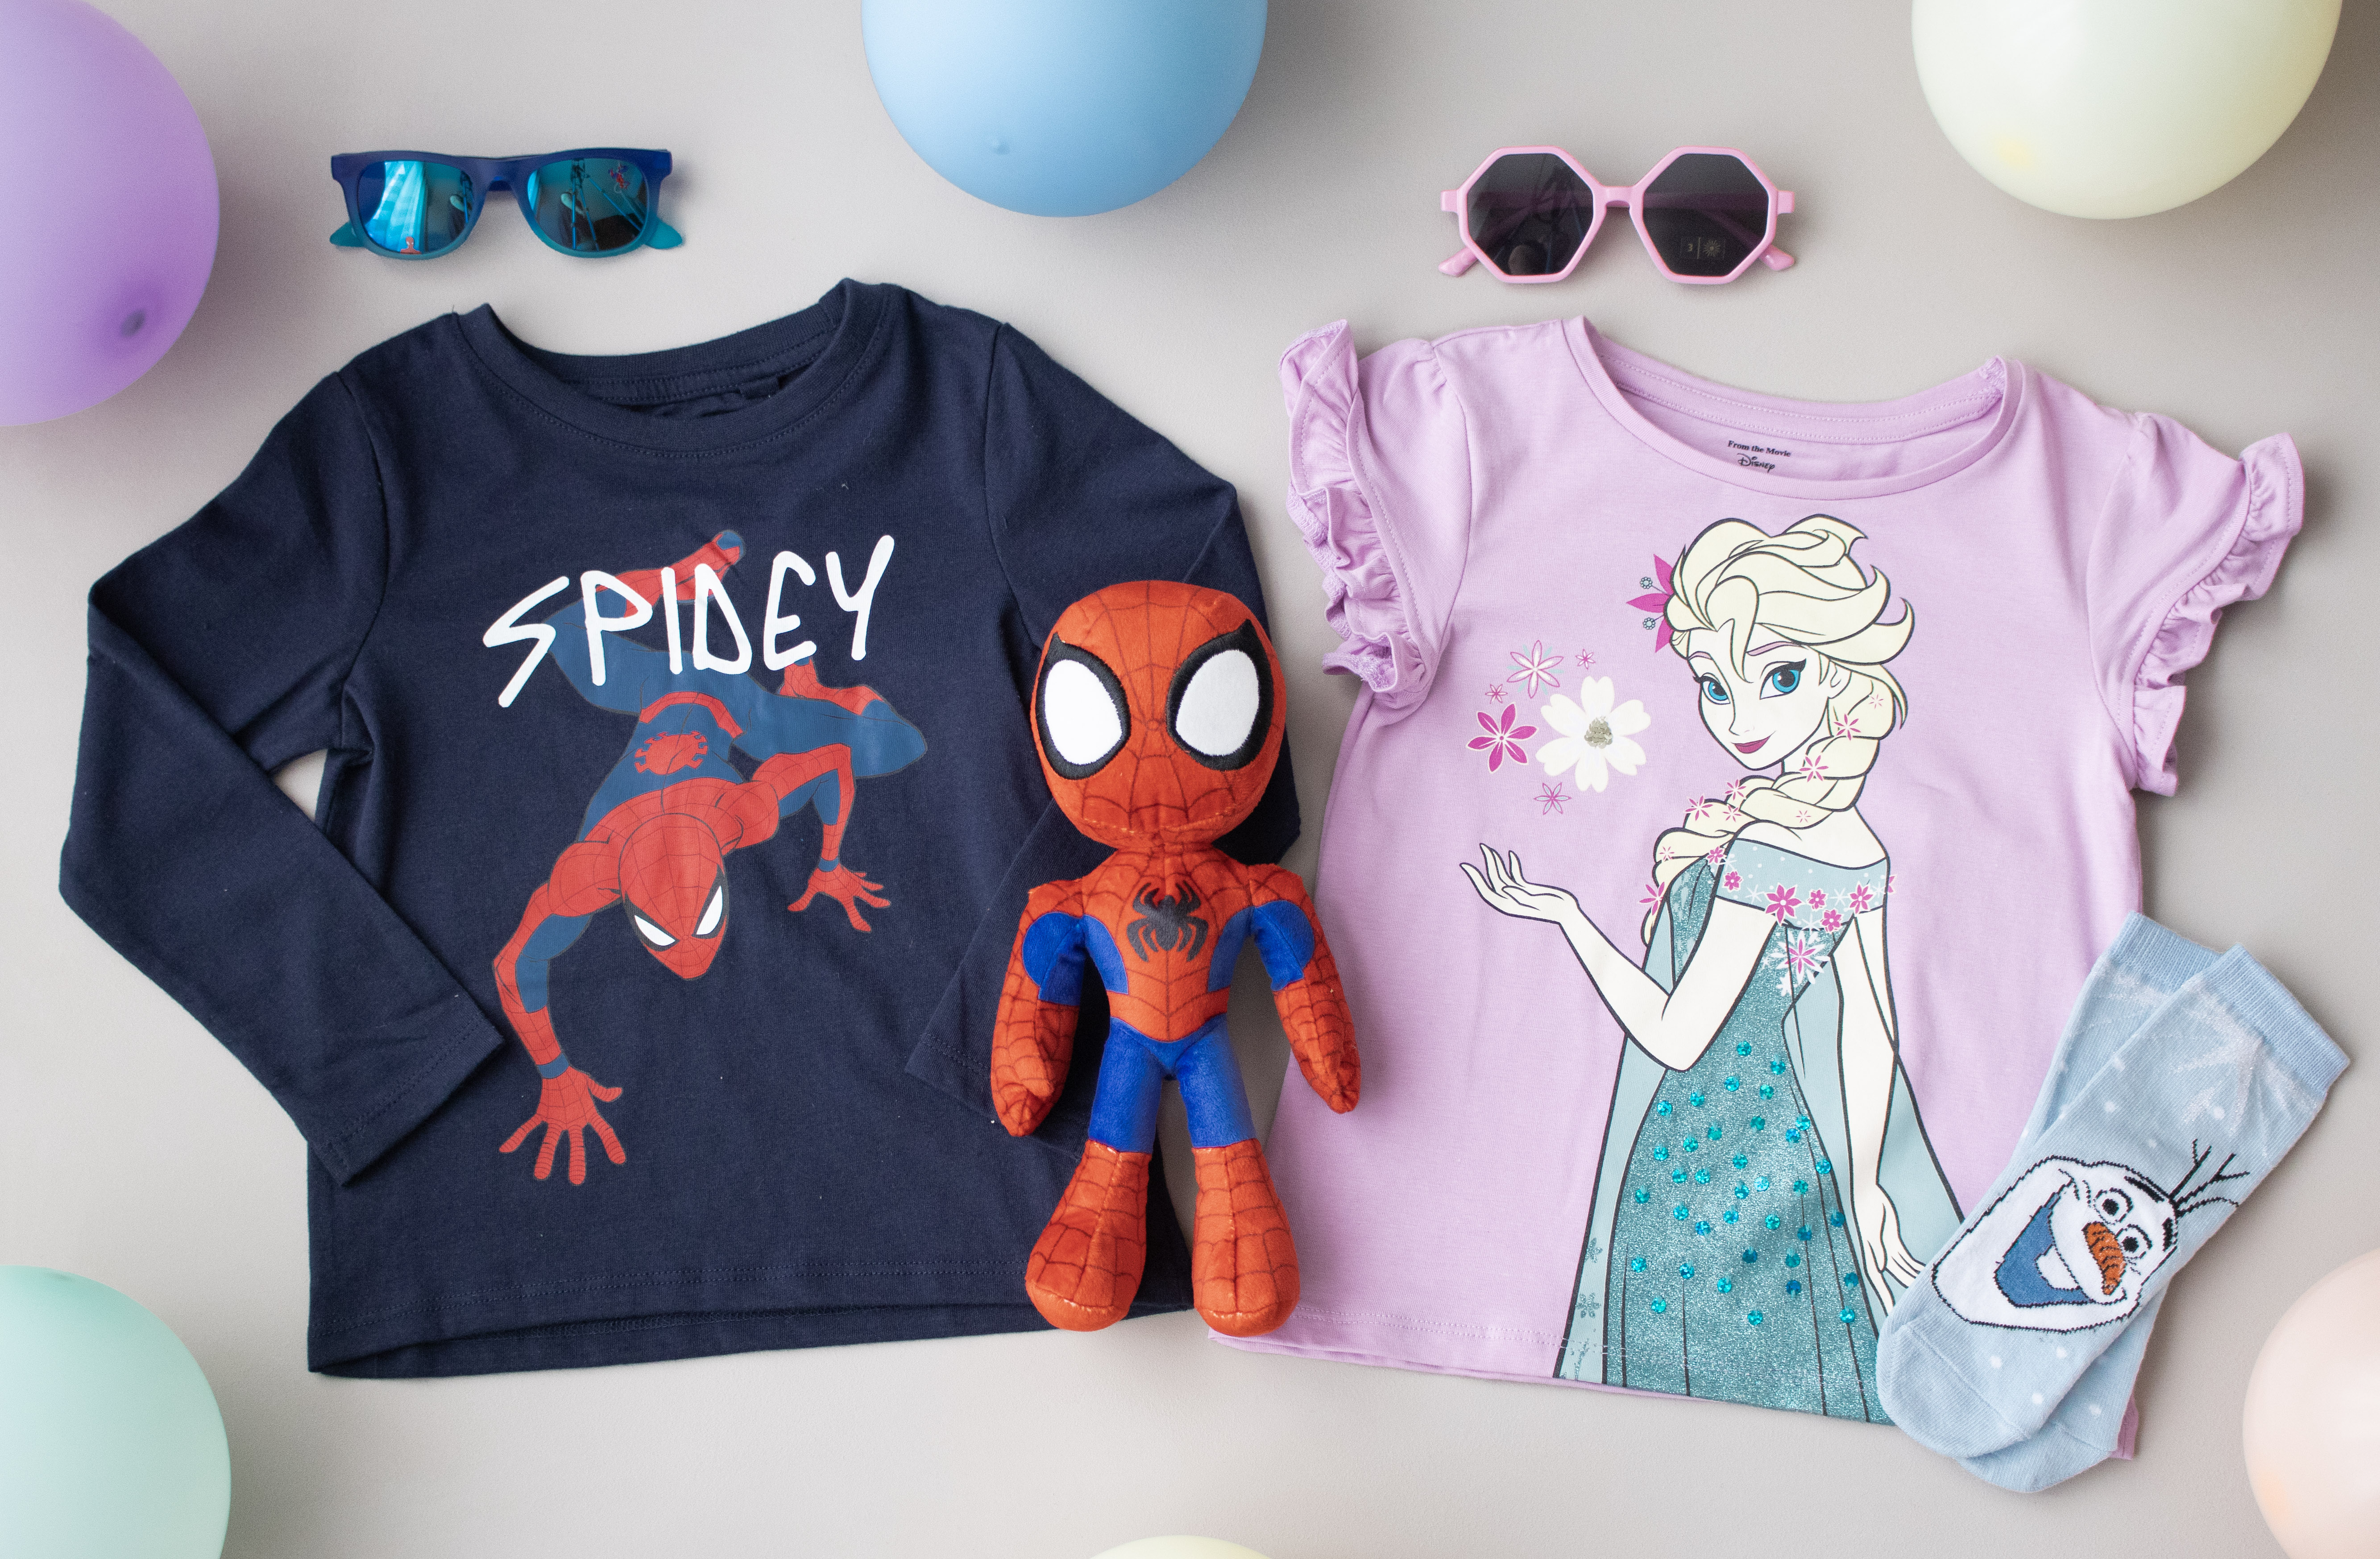 Gifts for 6-year-olds: clothes and accessories from Spider-Man and the Ice Queen.